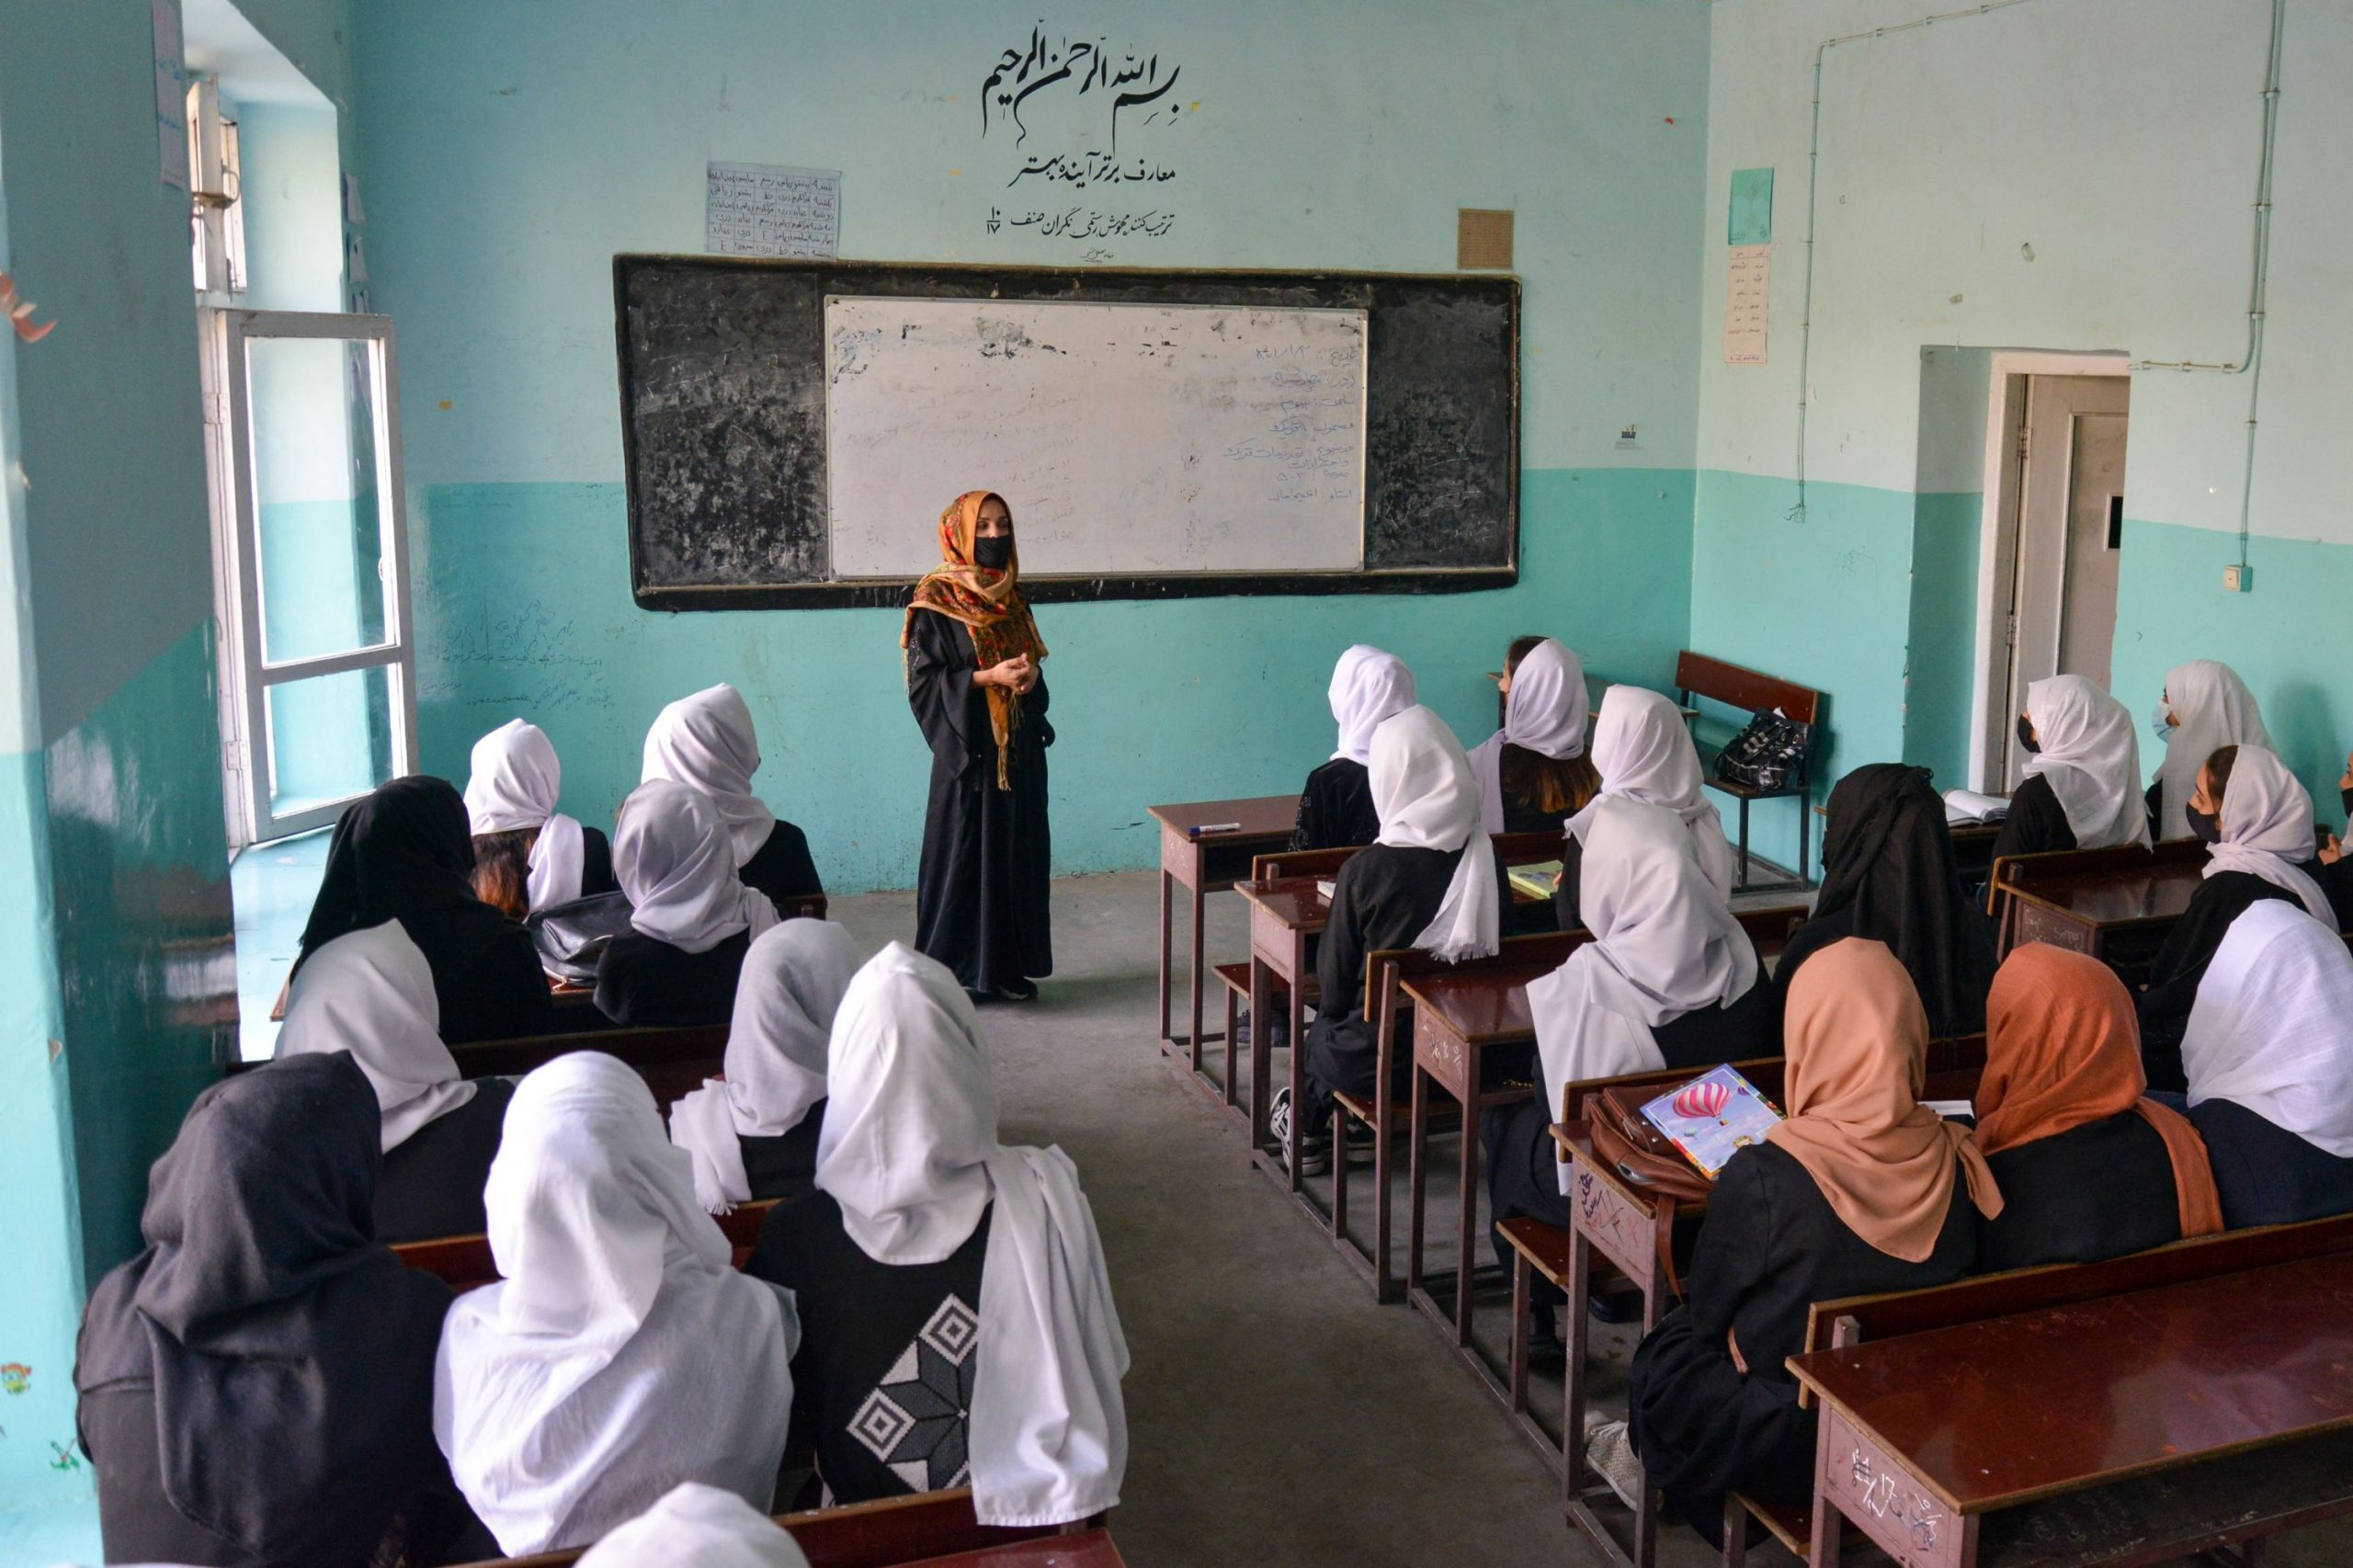 Afghan families move to Iran to defy Taliban's education ban for girls